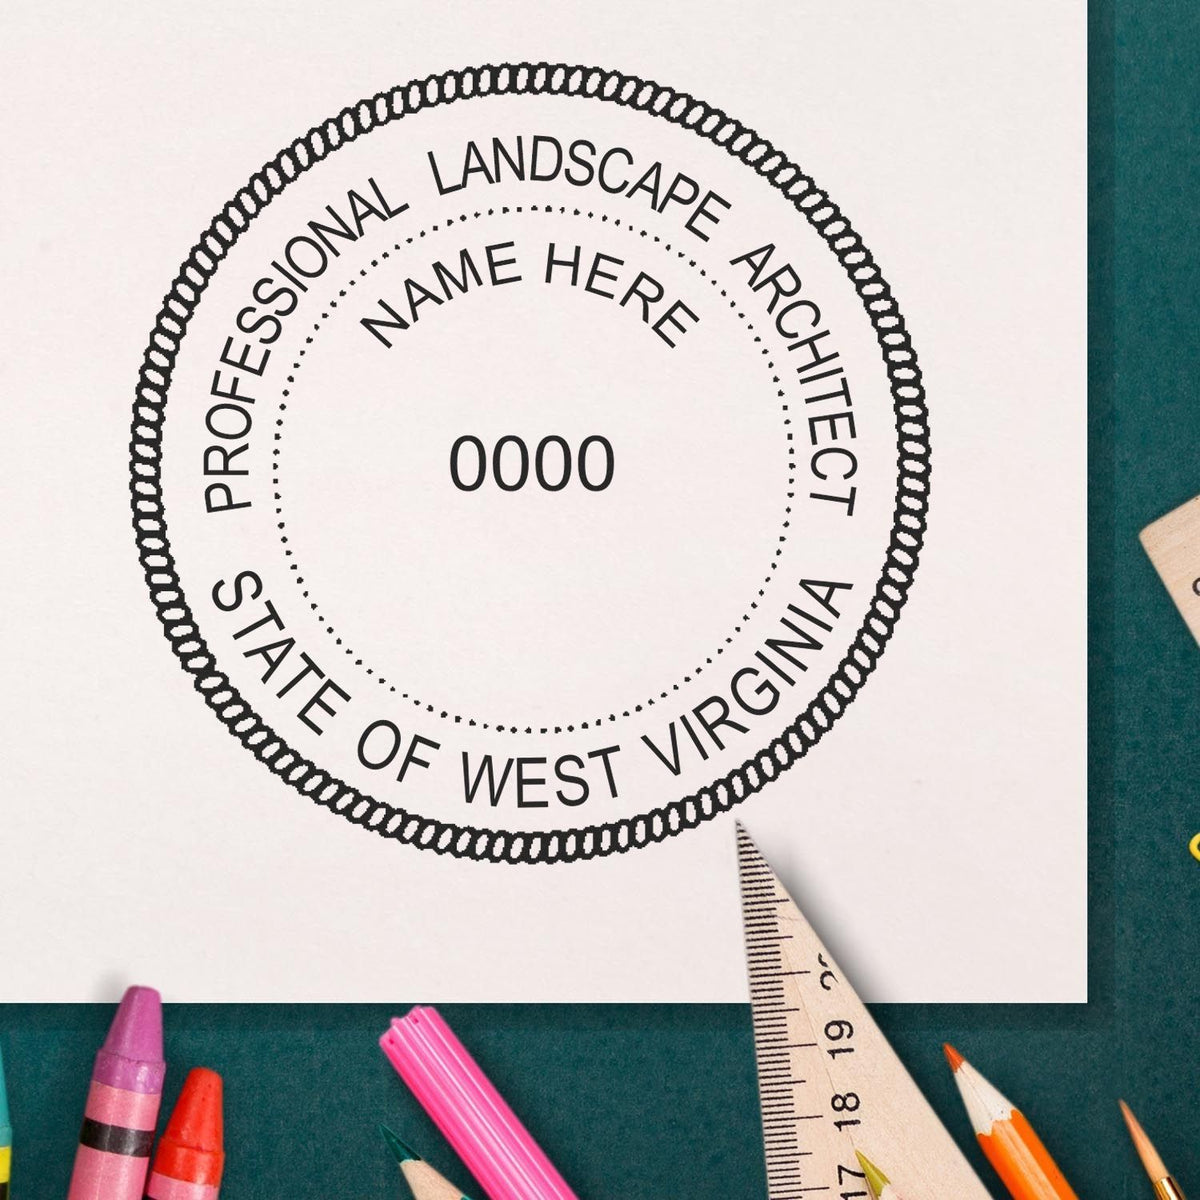 A lifestyle photo showing a stamped image of the Digital West Virginia Landscape Architect Stamp on a piece of paper